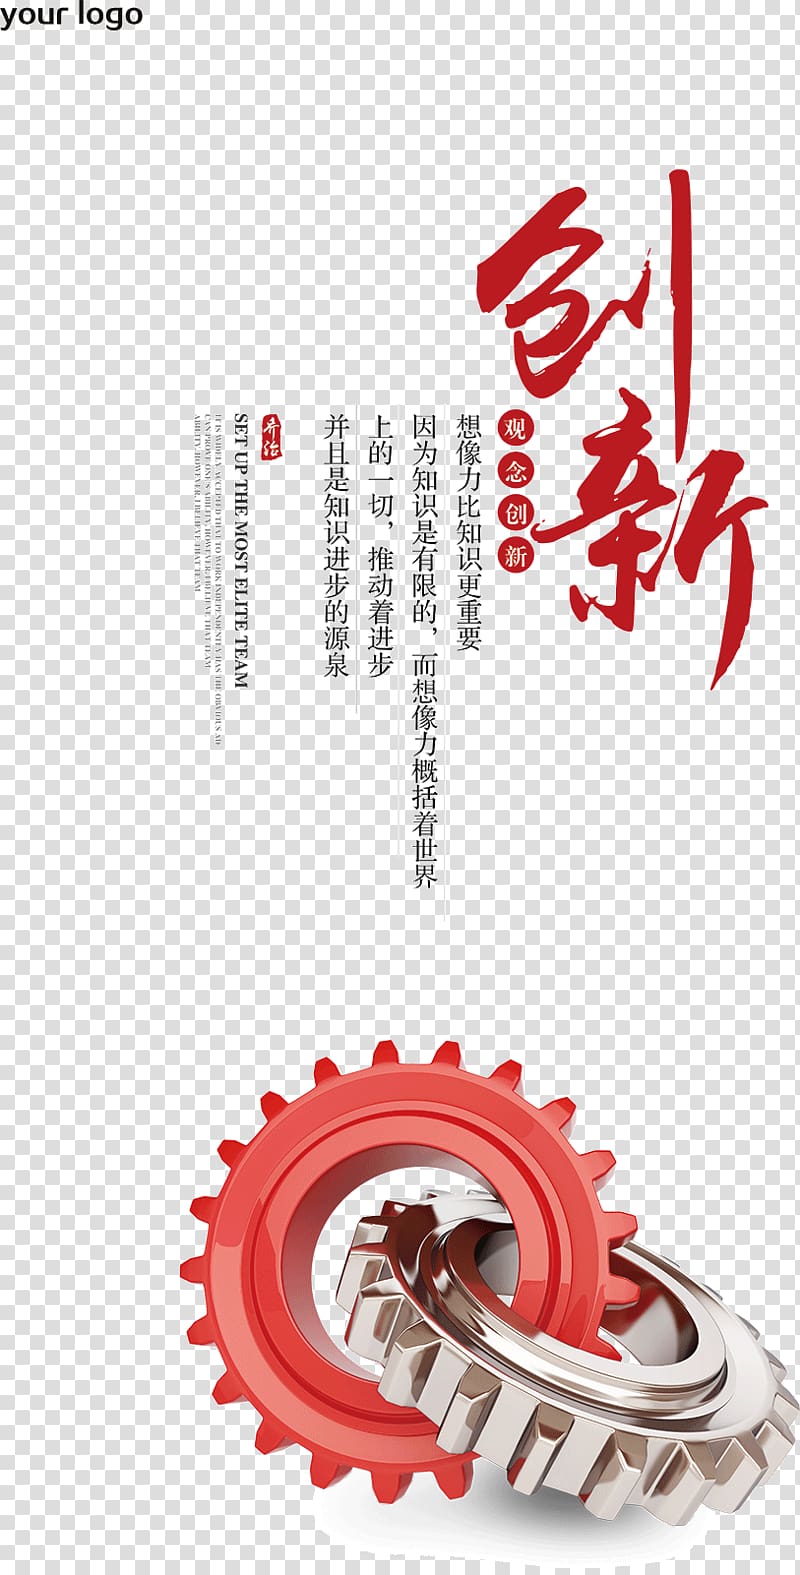 red and silver gears with text overlay, Concept Innovation Culture Posters transparent background PNG clipart